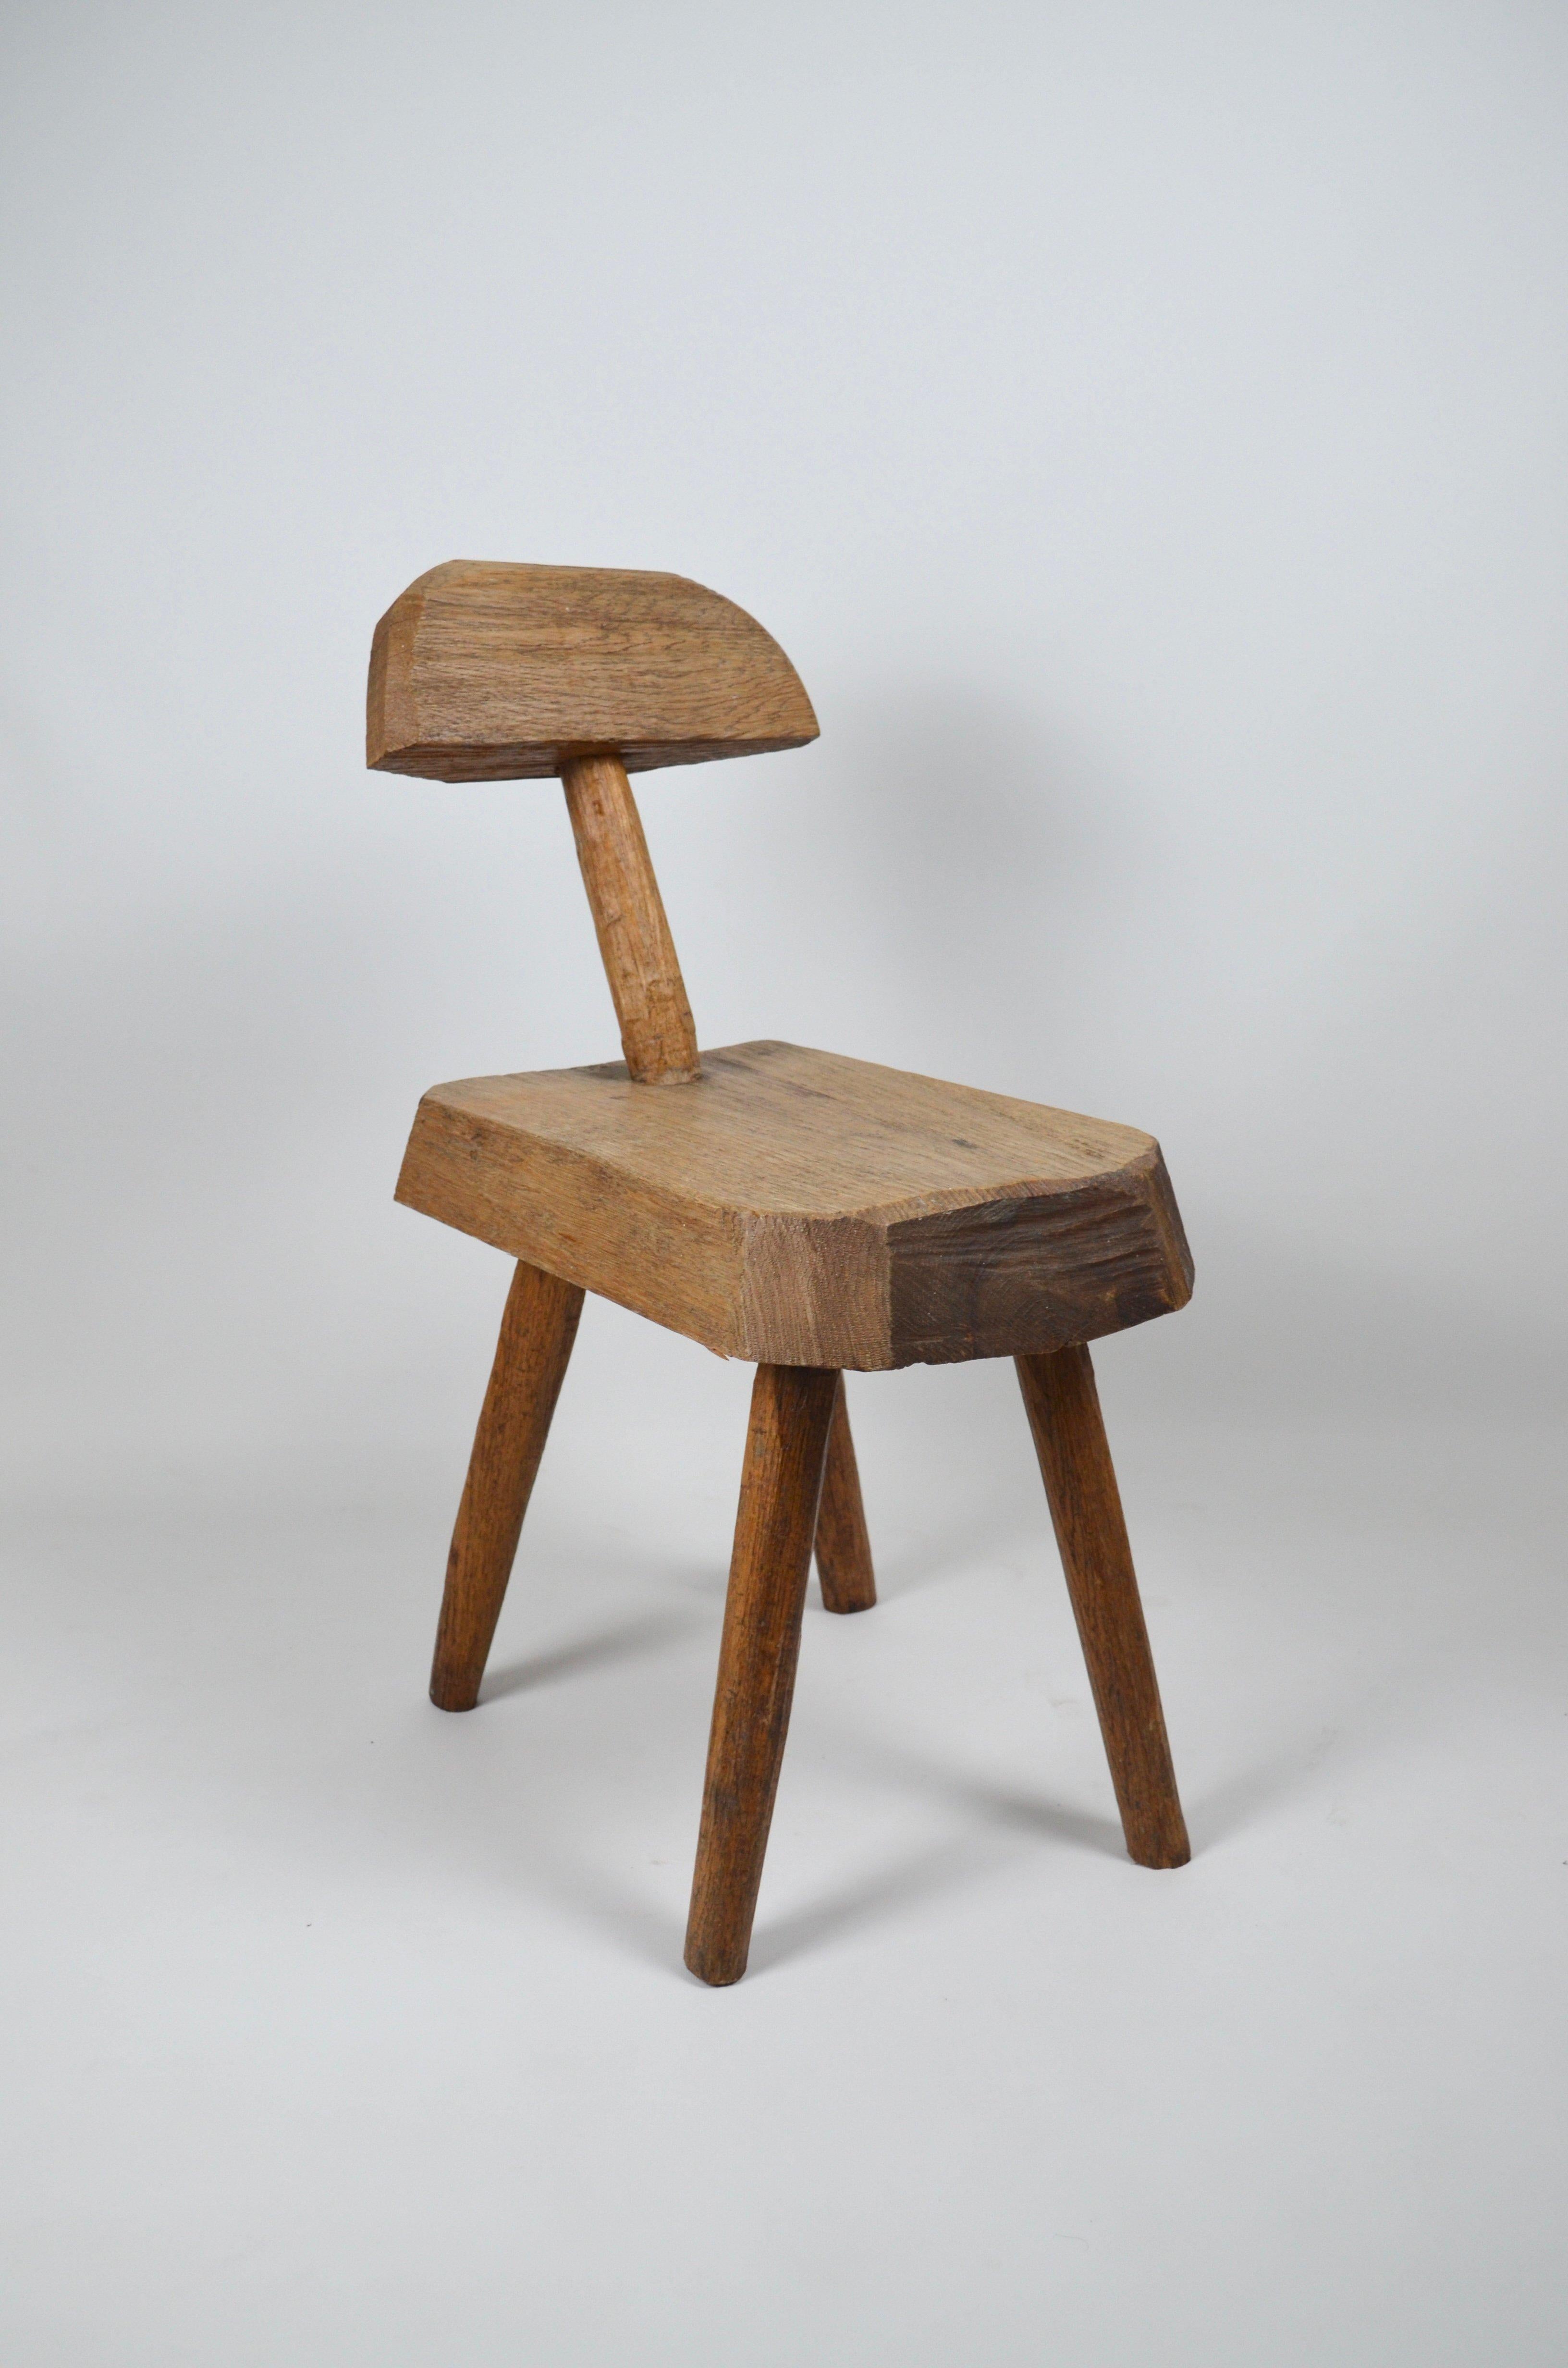 Solid Wood brutalist chair from France
Stable and in very good condition.